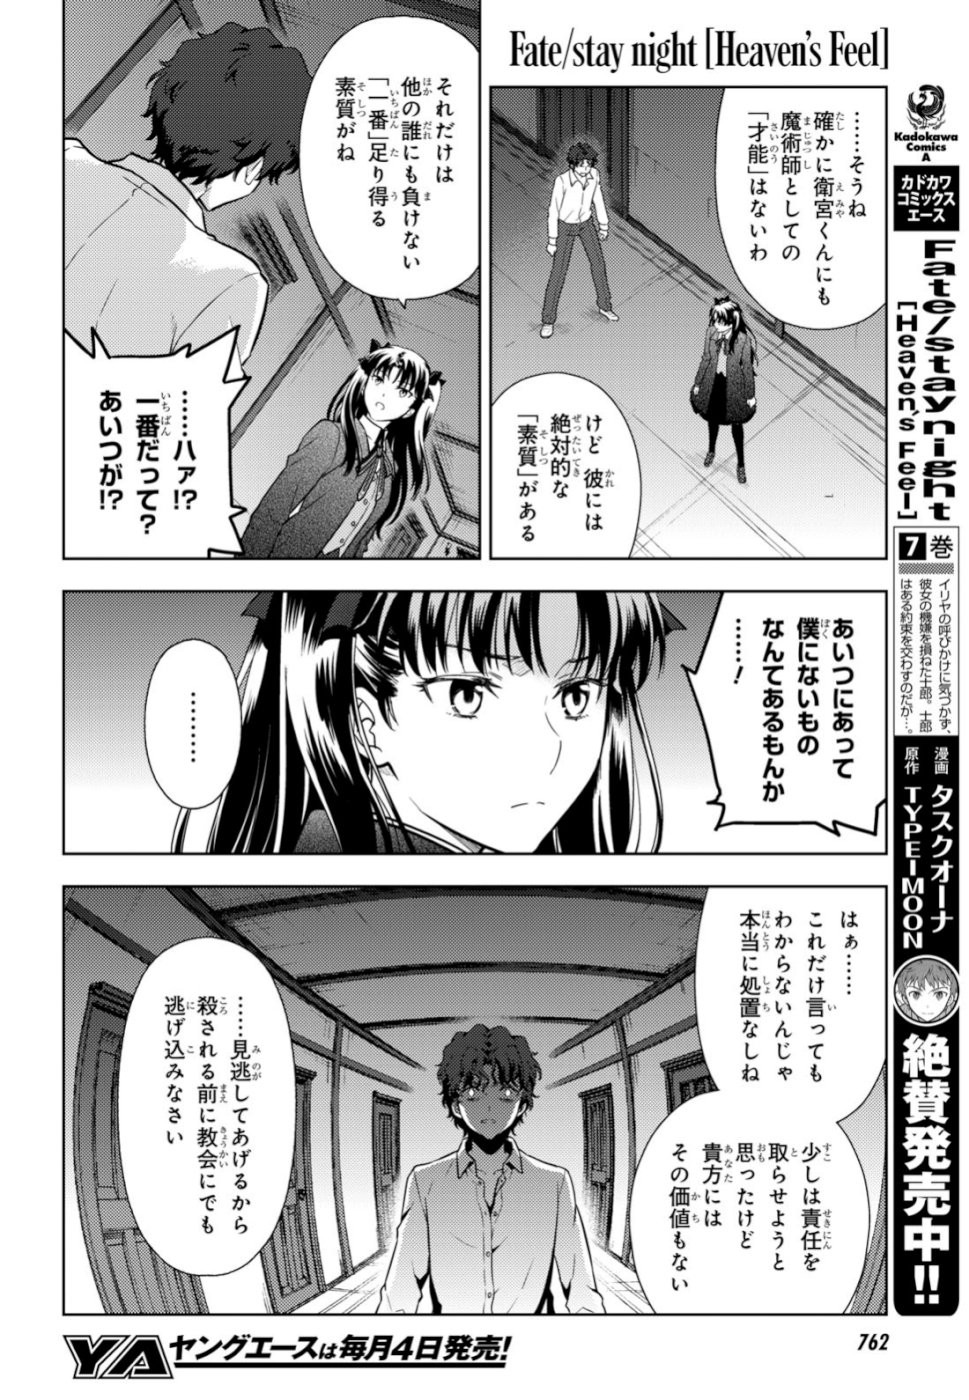 Fate/Stay night Heaven's Feel - Chapter 52 - Page 2